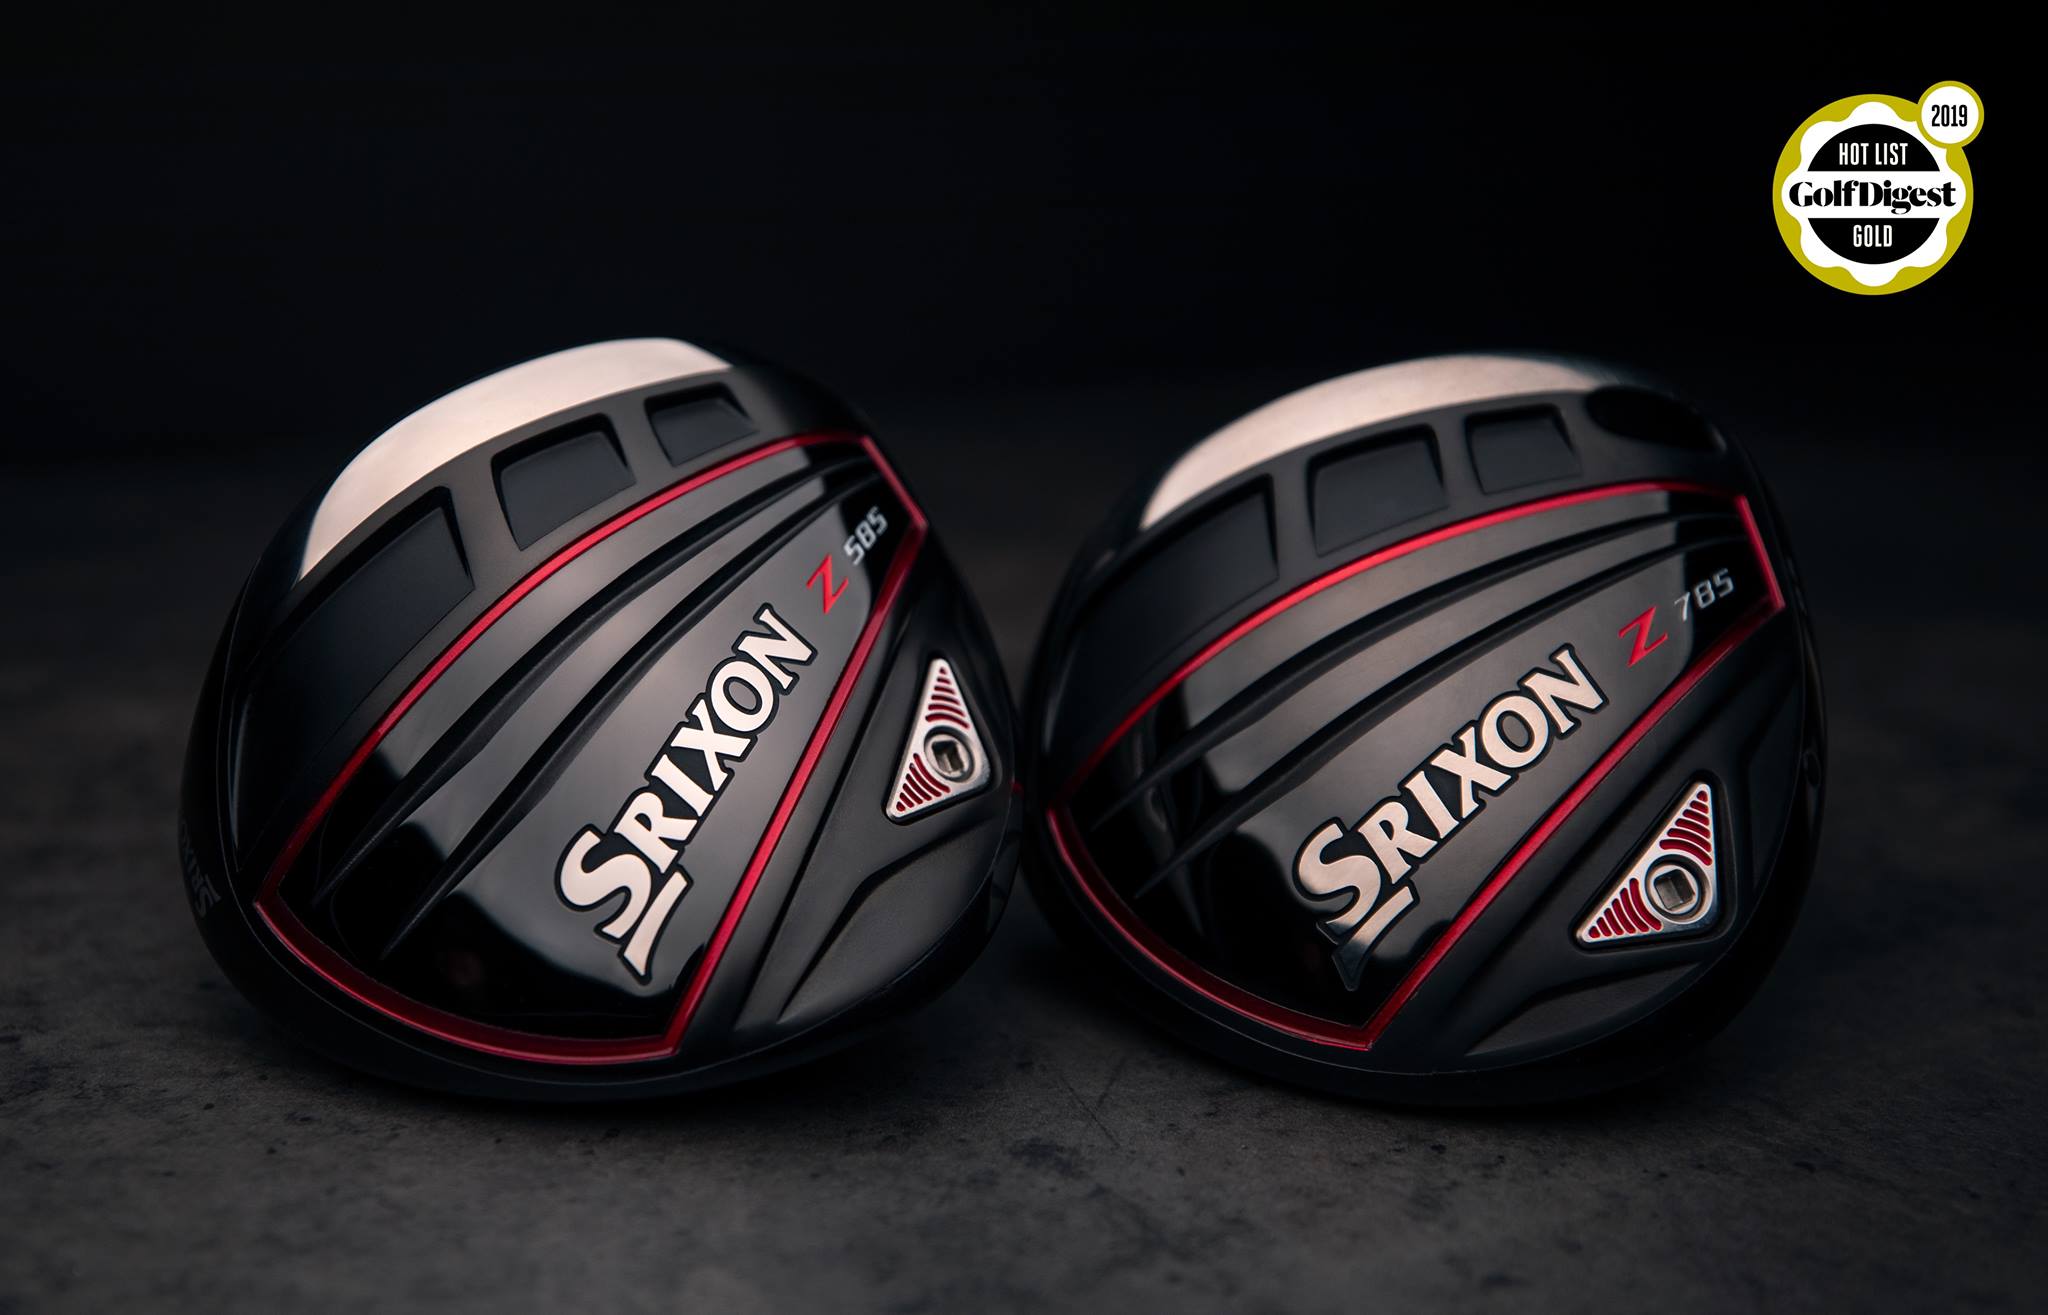 Srixon Golf Demo Day at Dungeness Golf Course